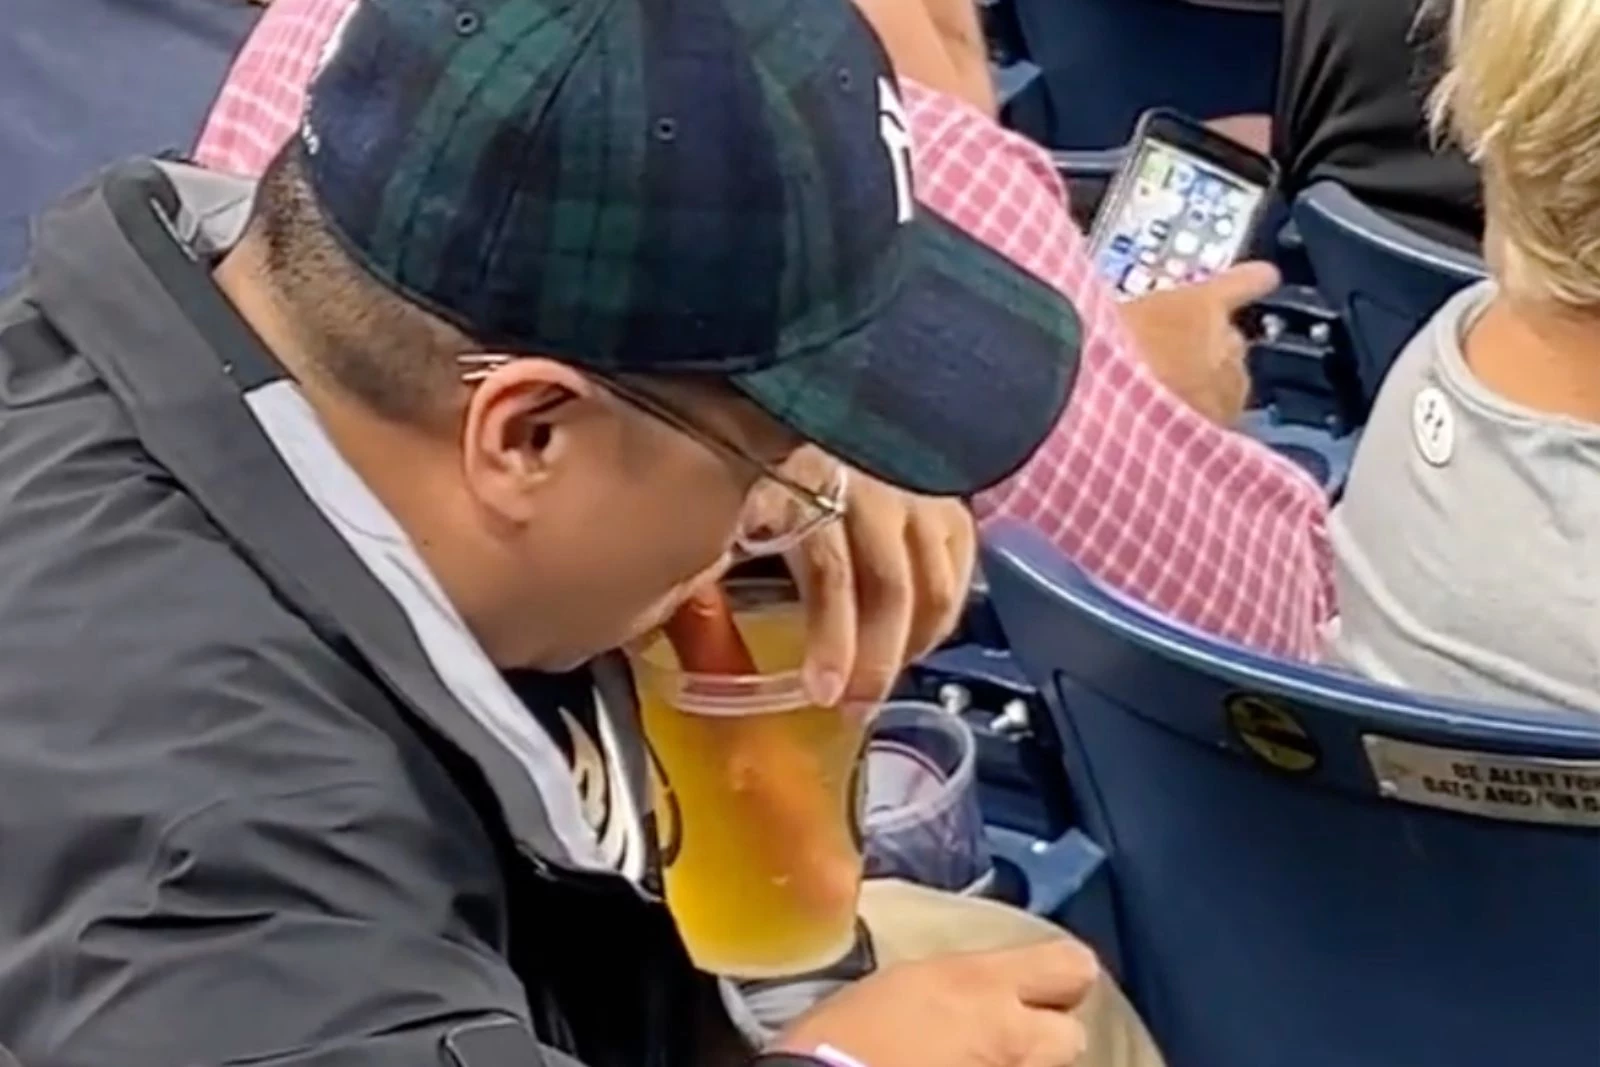 This Yankees Fan is Another Reason That Red Sox Fans Are Superior